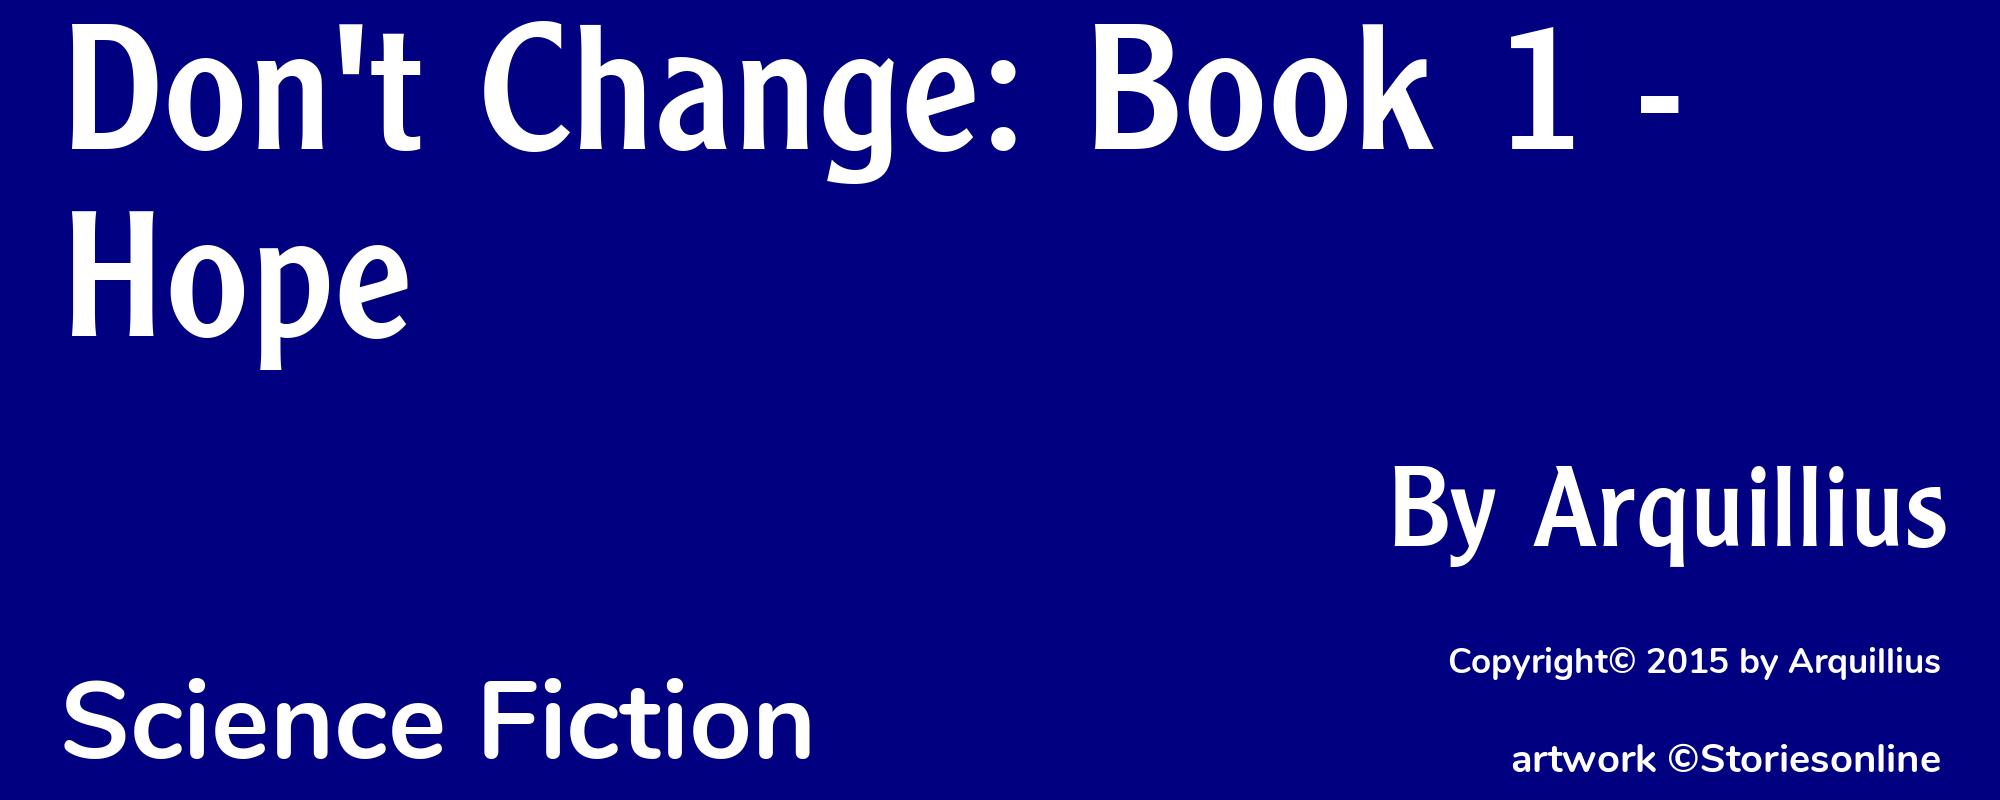 Don't Change: Book 1 - Hope - Cover